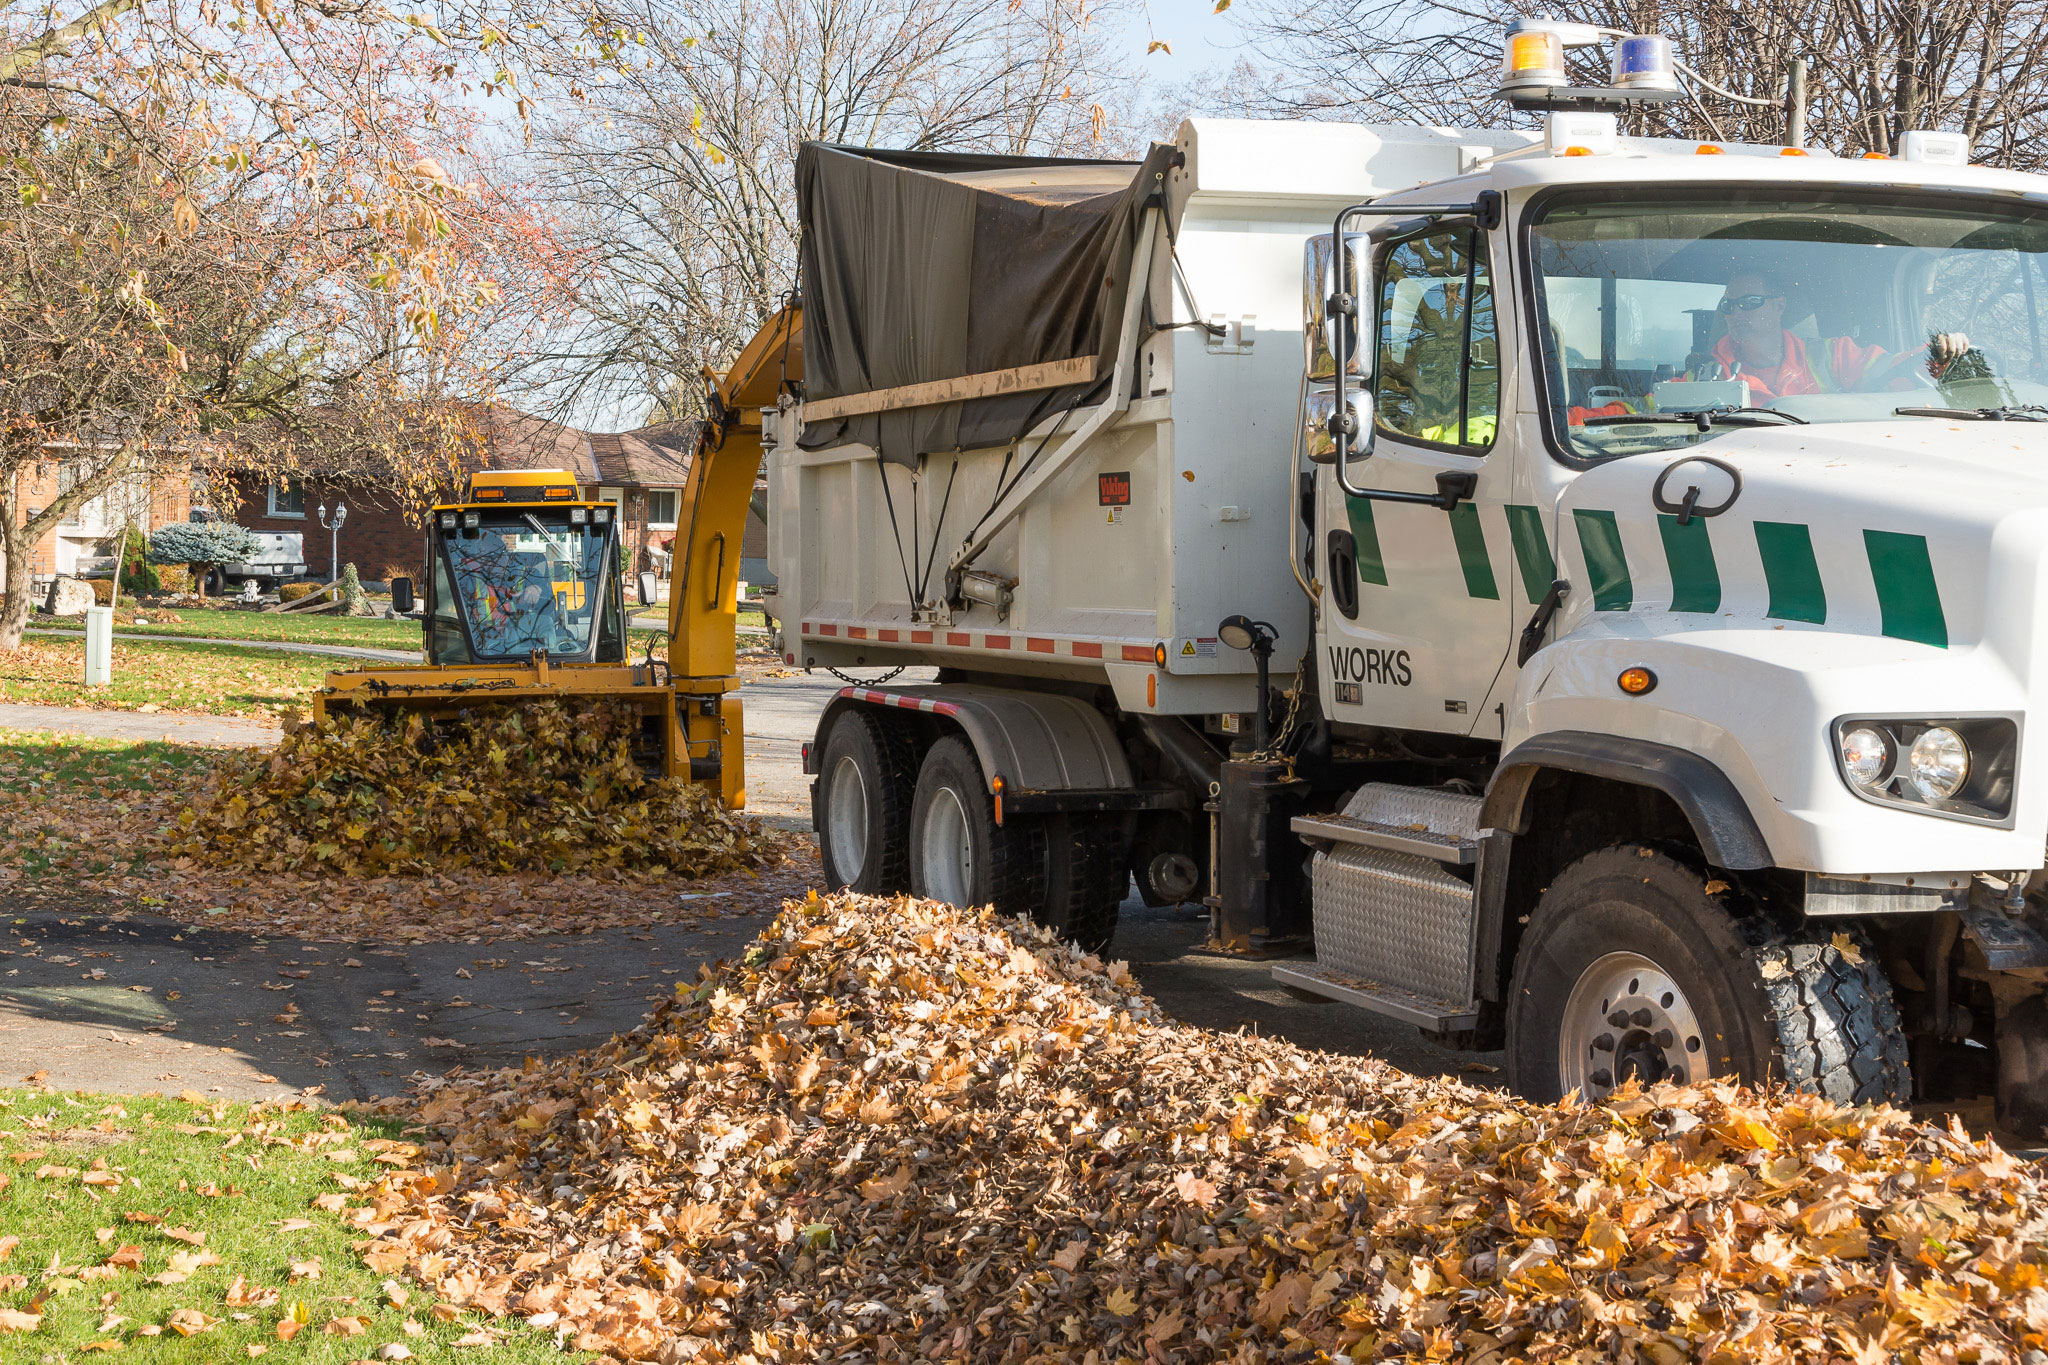 trackless leaf loader performing leaf cleanup and leaf collection on a municipality's street in autumn